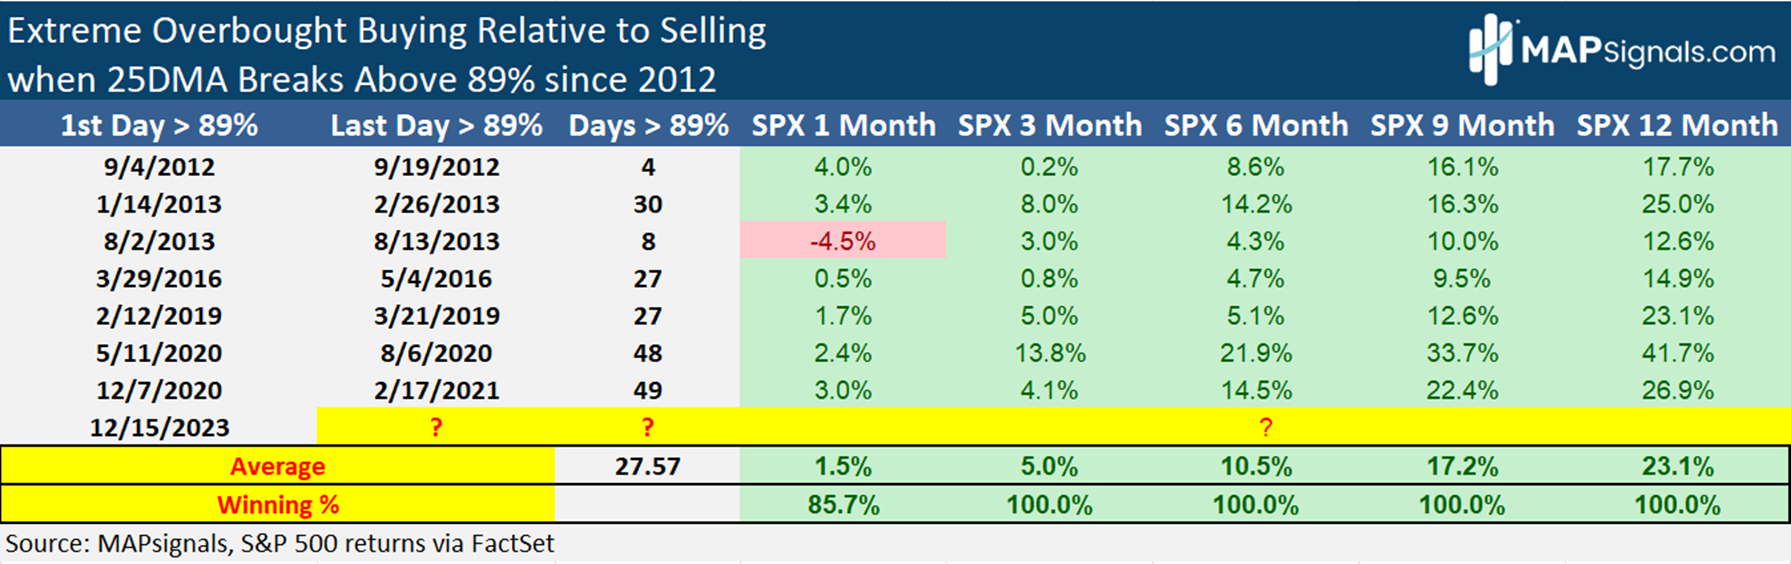 Extreme Overbought Buying Relative to Selling when 25DMA breaks above 89% since 2012 | MAPsignals